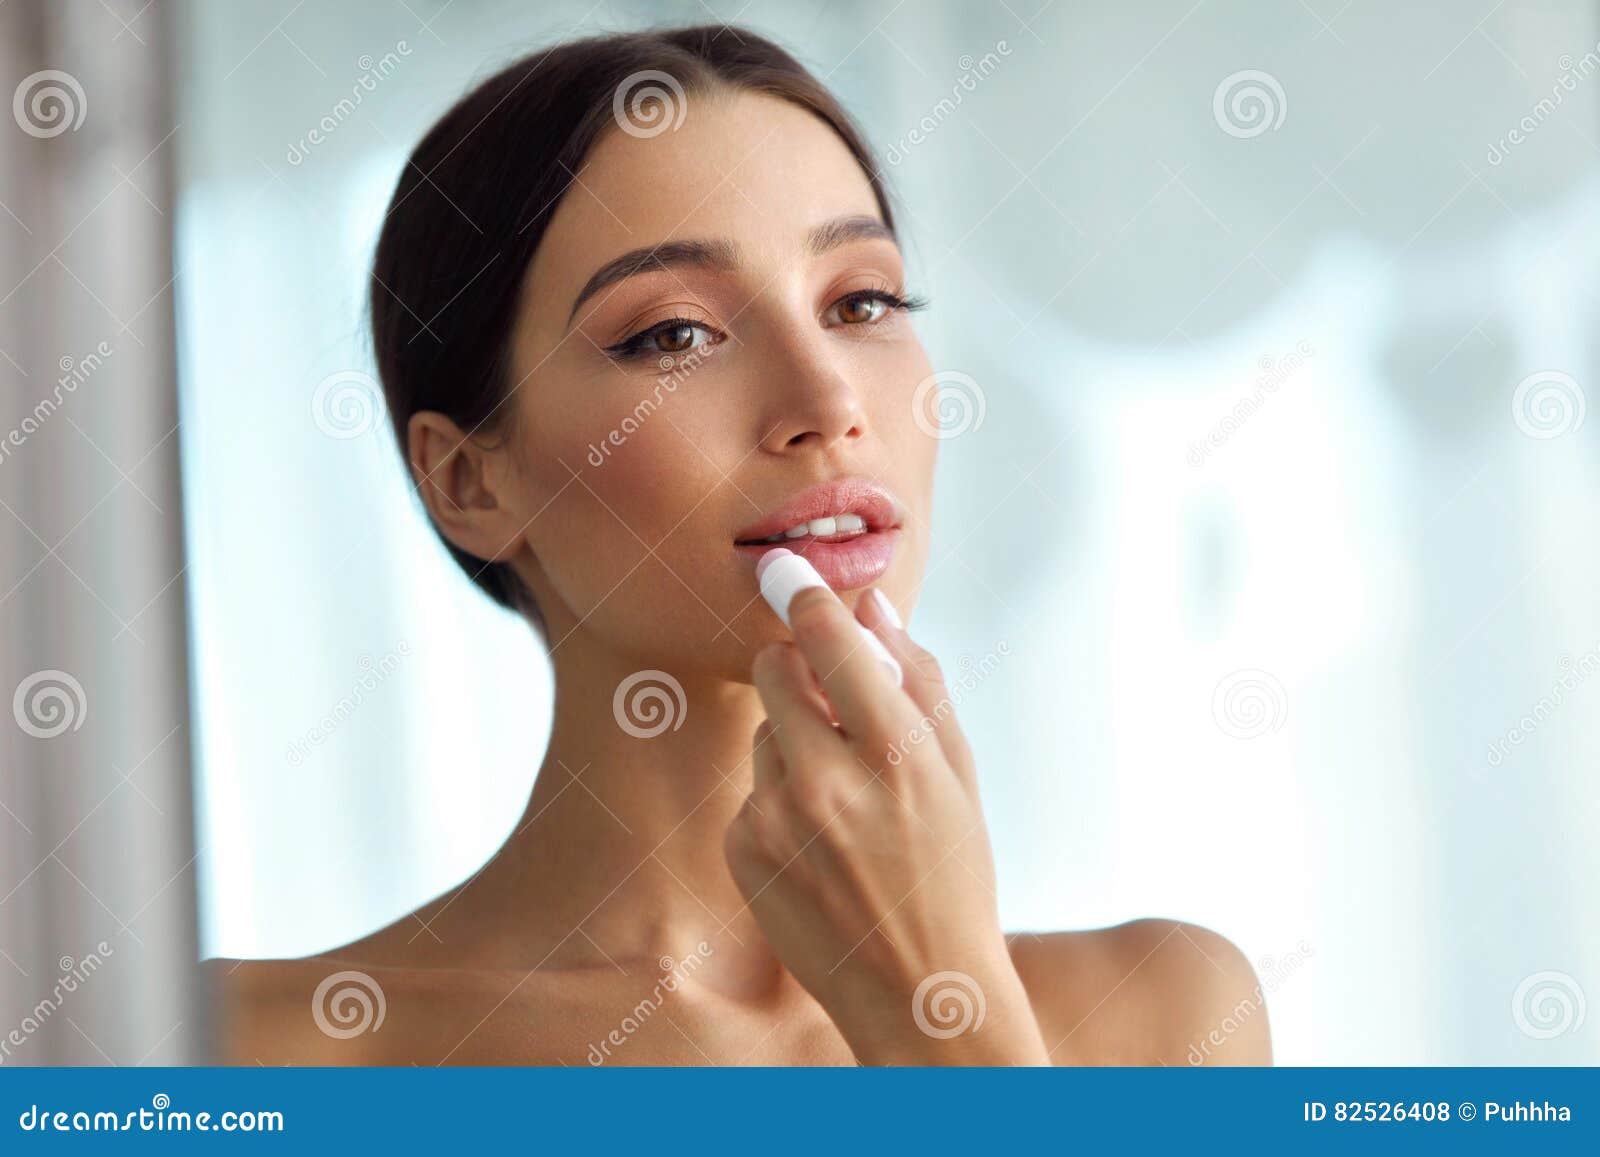 beautiful woman with beauty face applies balm on lips. skin care